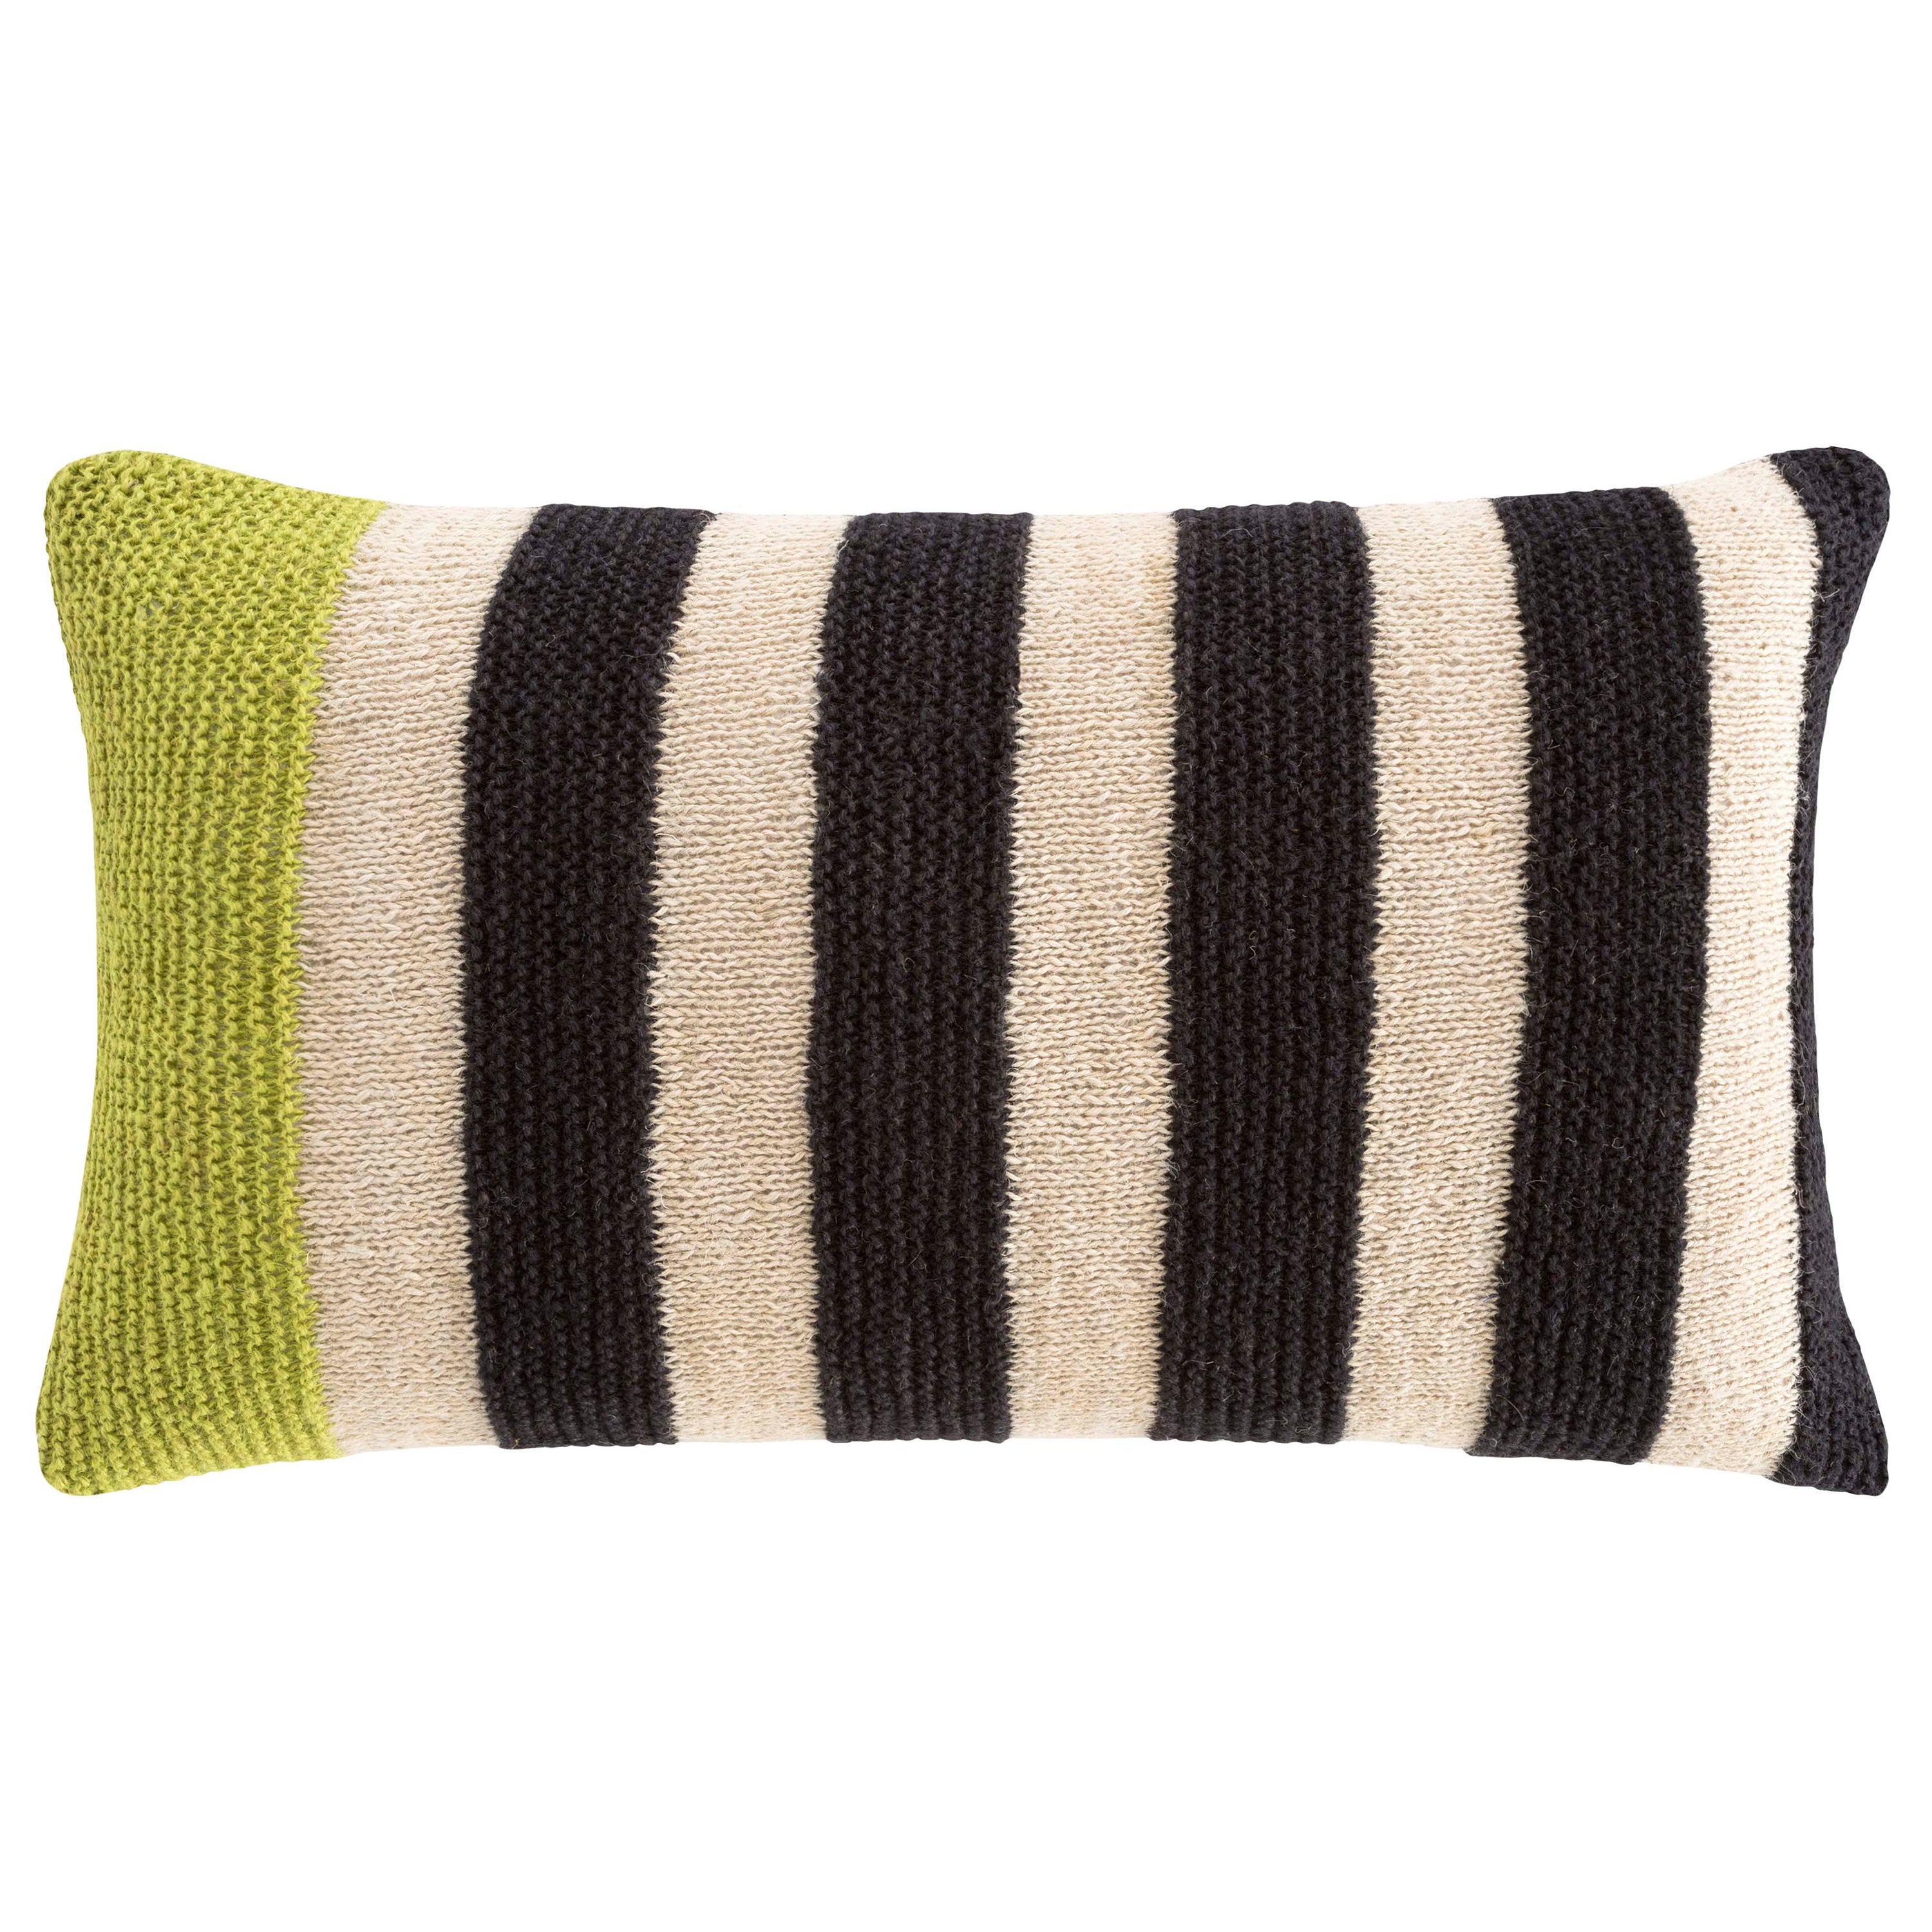 GAN Spaces Rustic Chic Geo Large Pillow in Pistachio by Sandra Figuerola